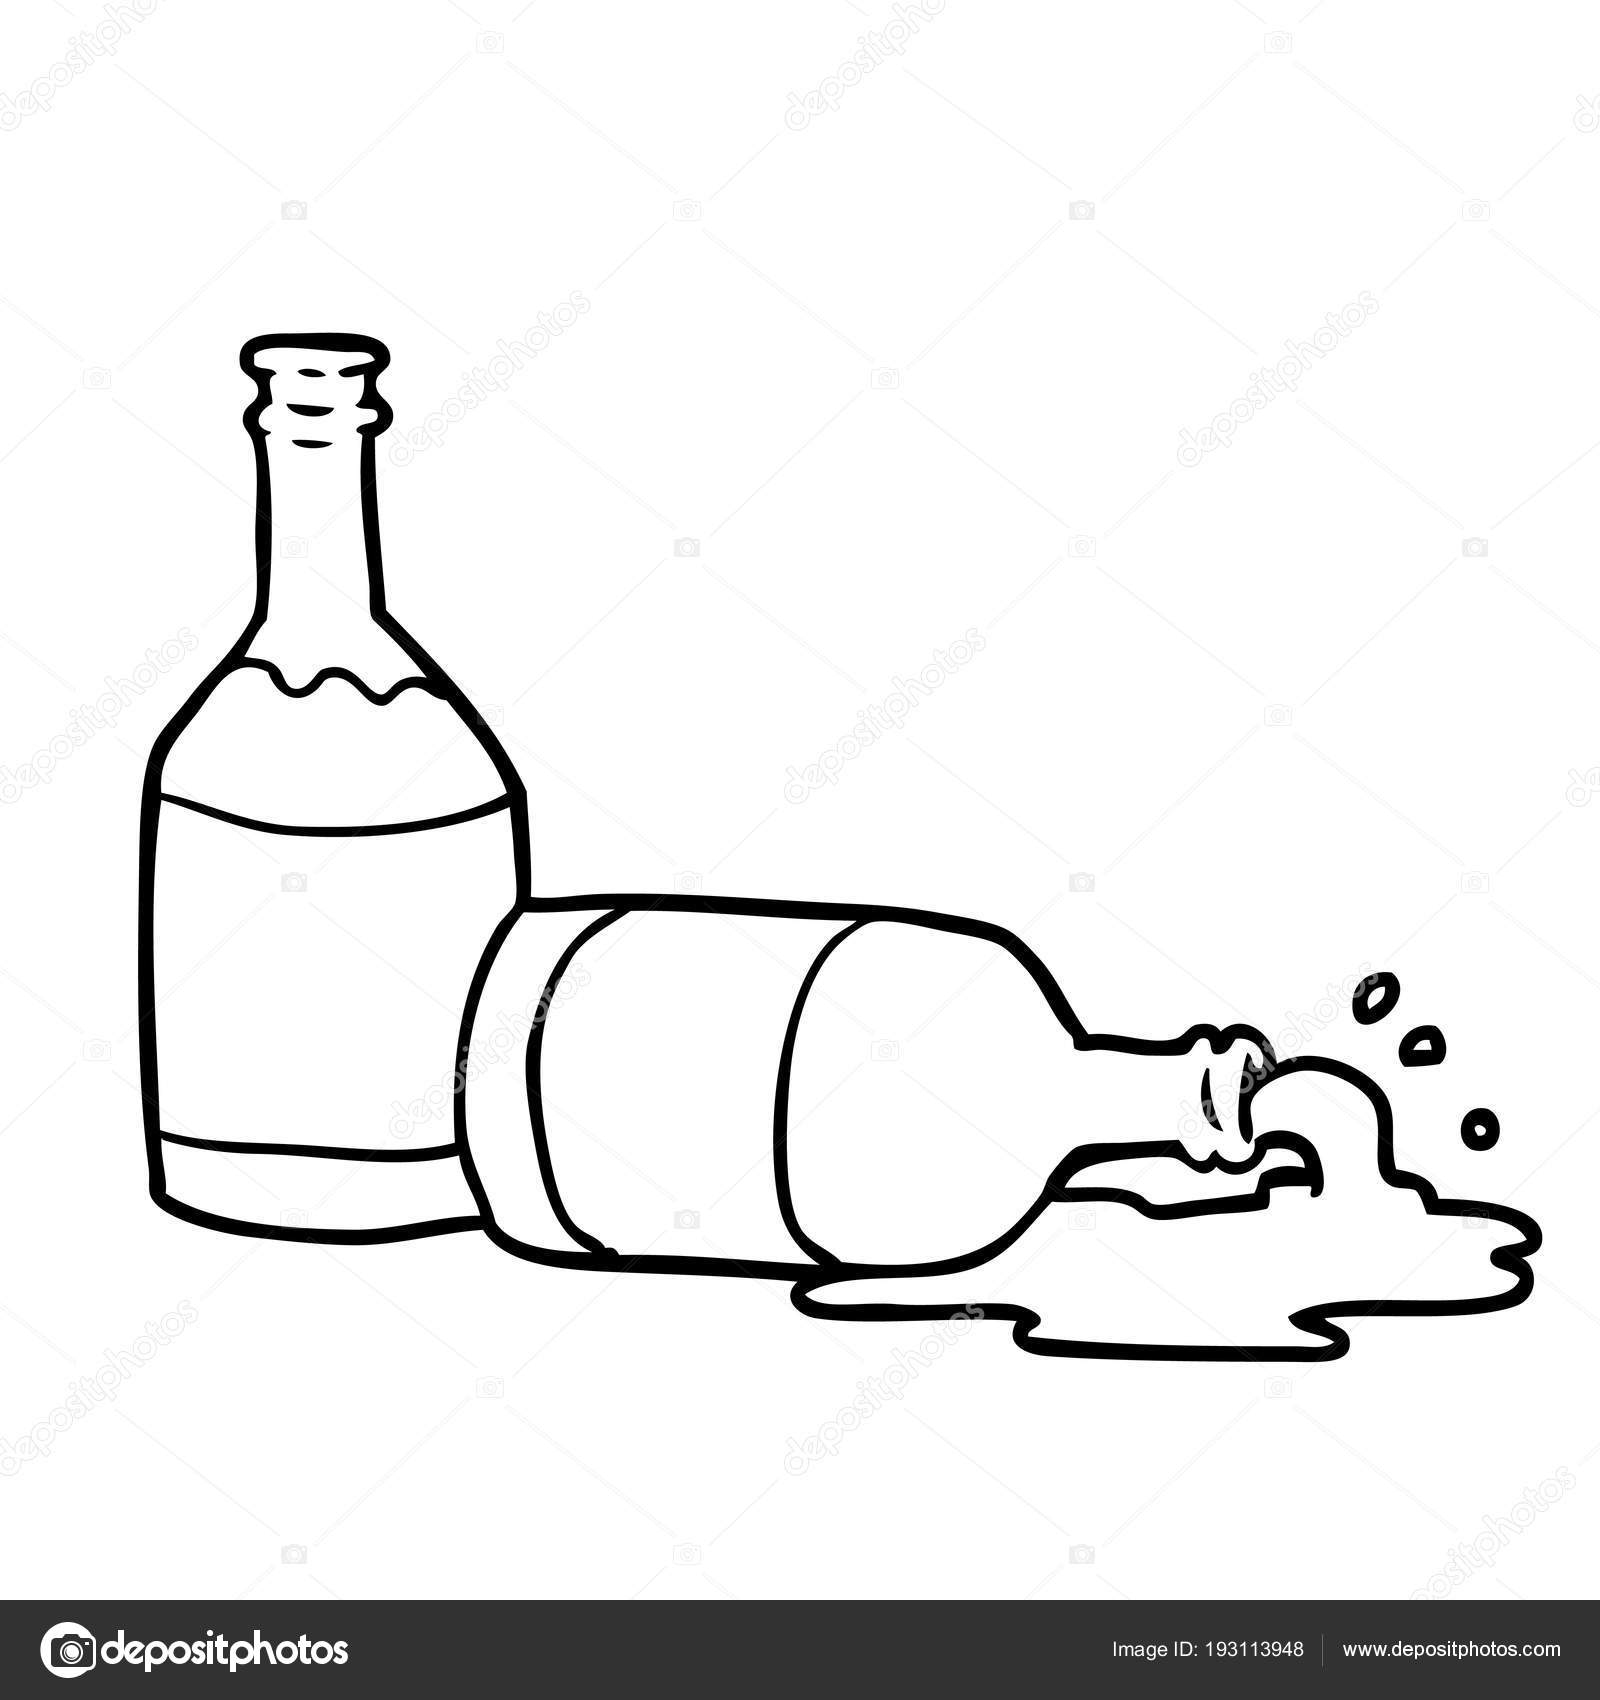 Beer bottle hand drawn sketch icon Royalty Free Vector Image